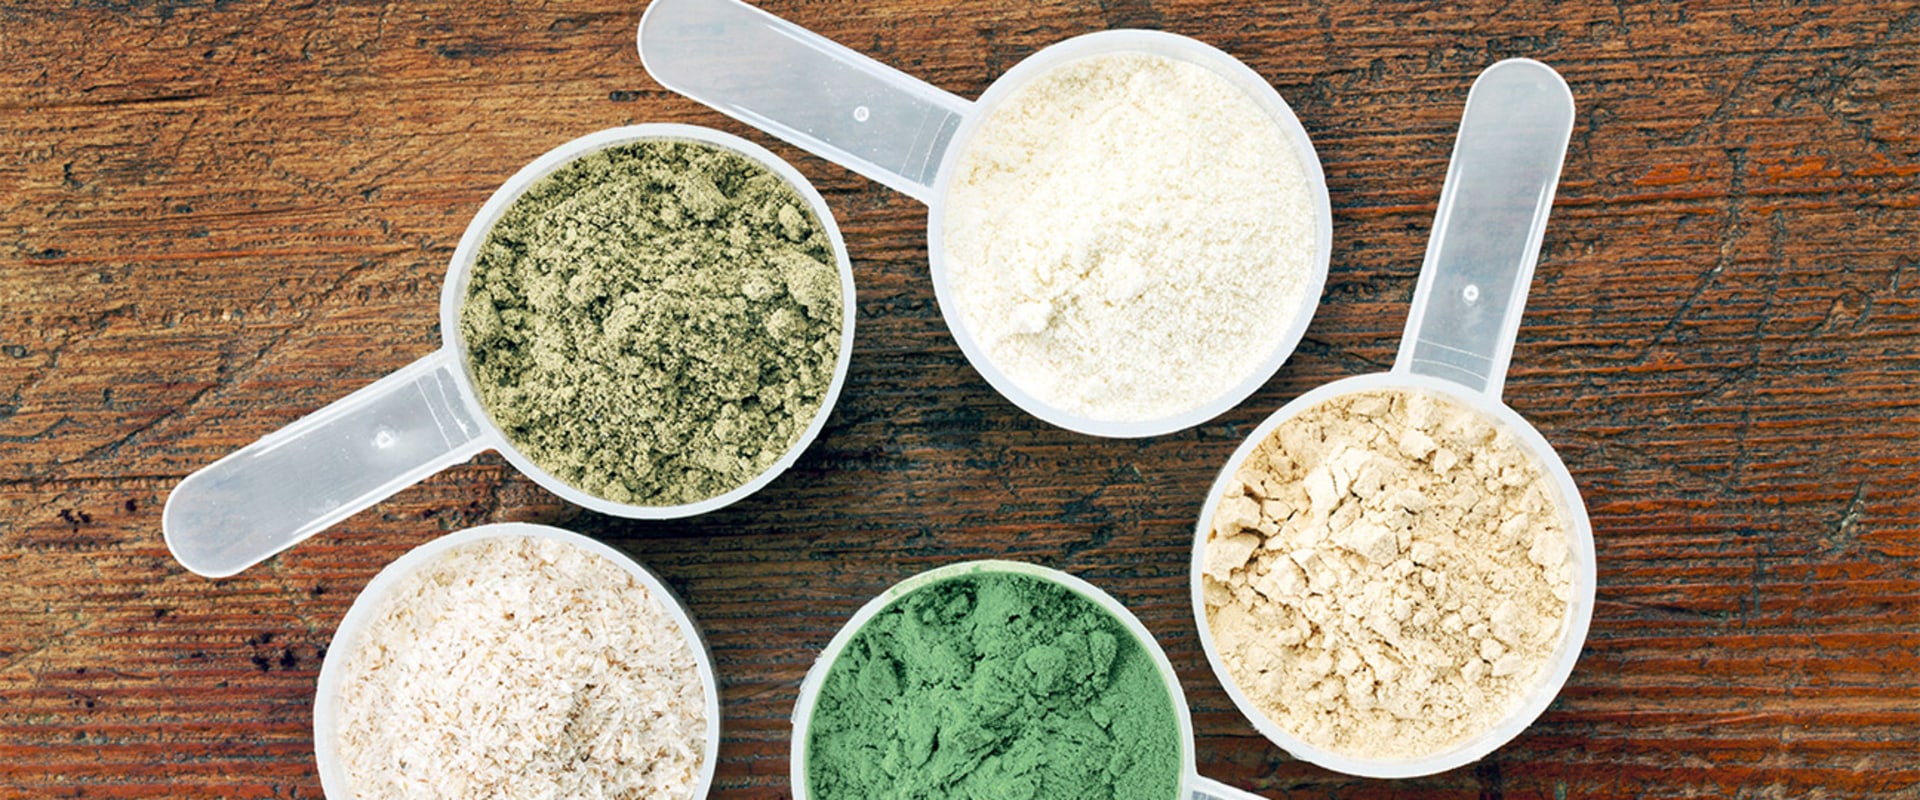 What is the best way to use protein powder?